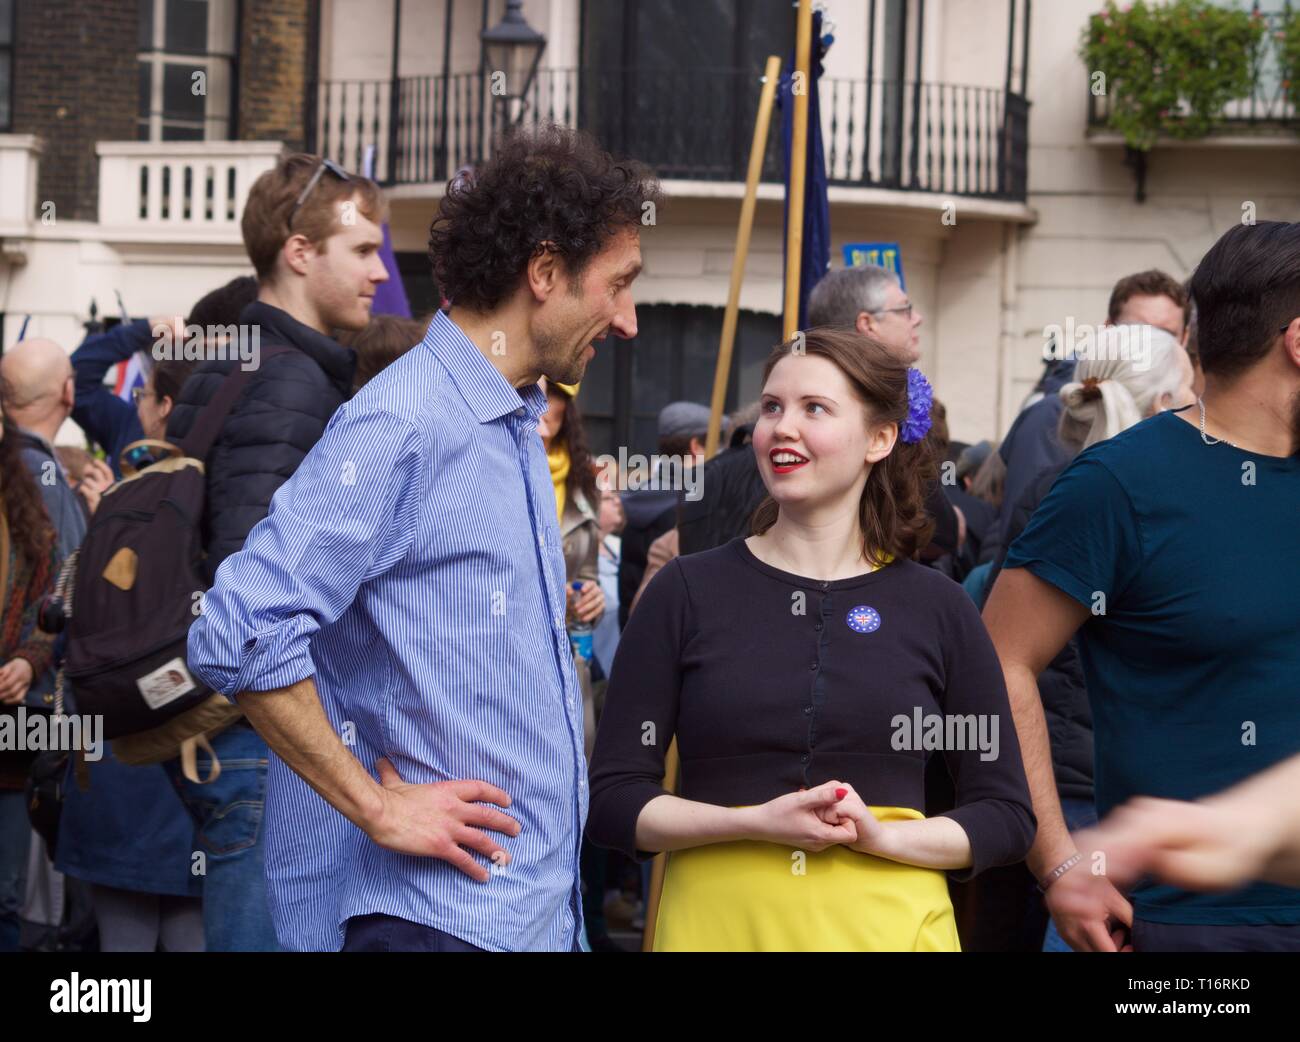 Young woman looking up at older man with aqualine nose at Revoke Article 50 Brexit rally Stock Photo